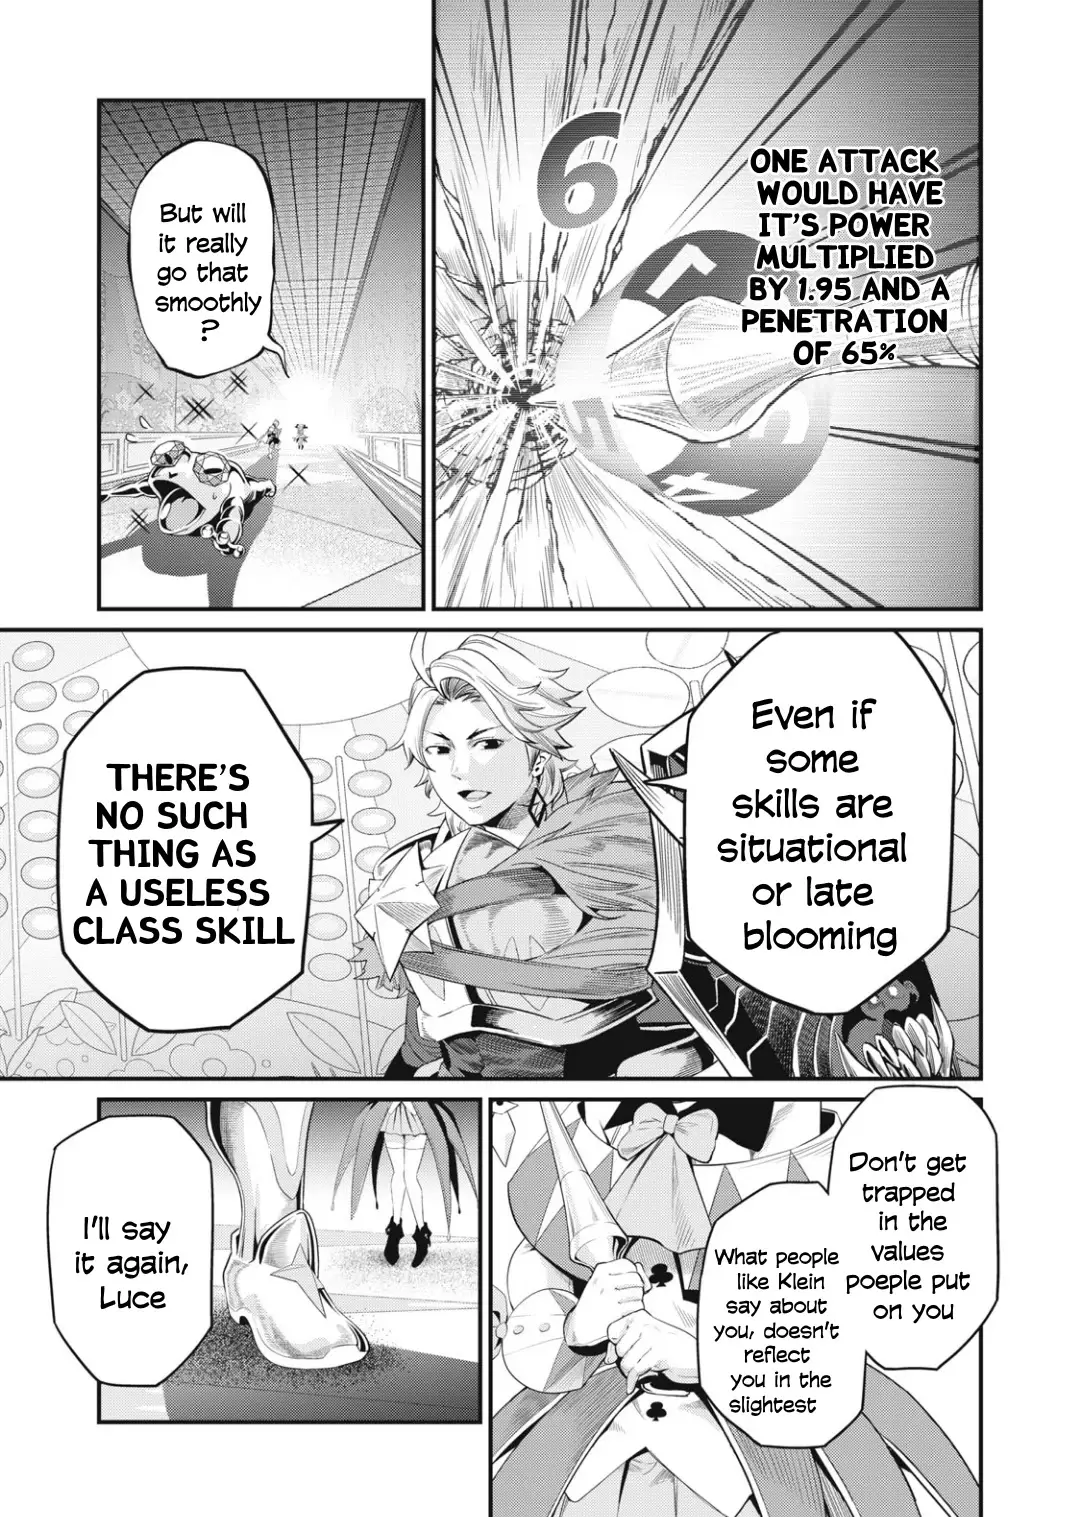 The Exiled Reincarnated Heavy Knight Is Unrivaled In Game Knowledge - 16 page 8-0034bee8